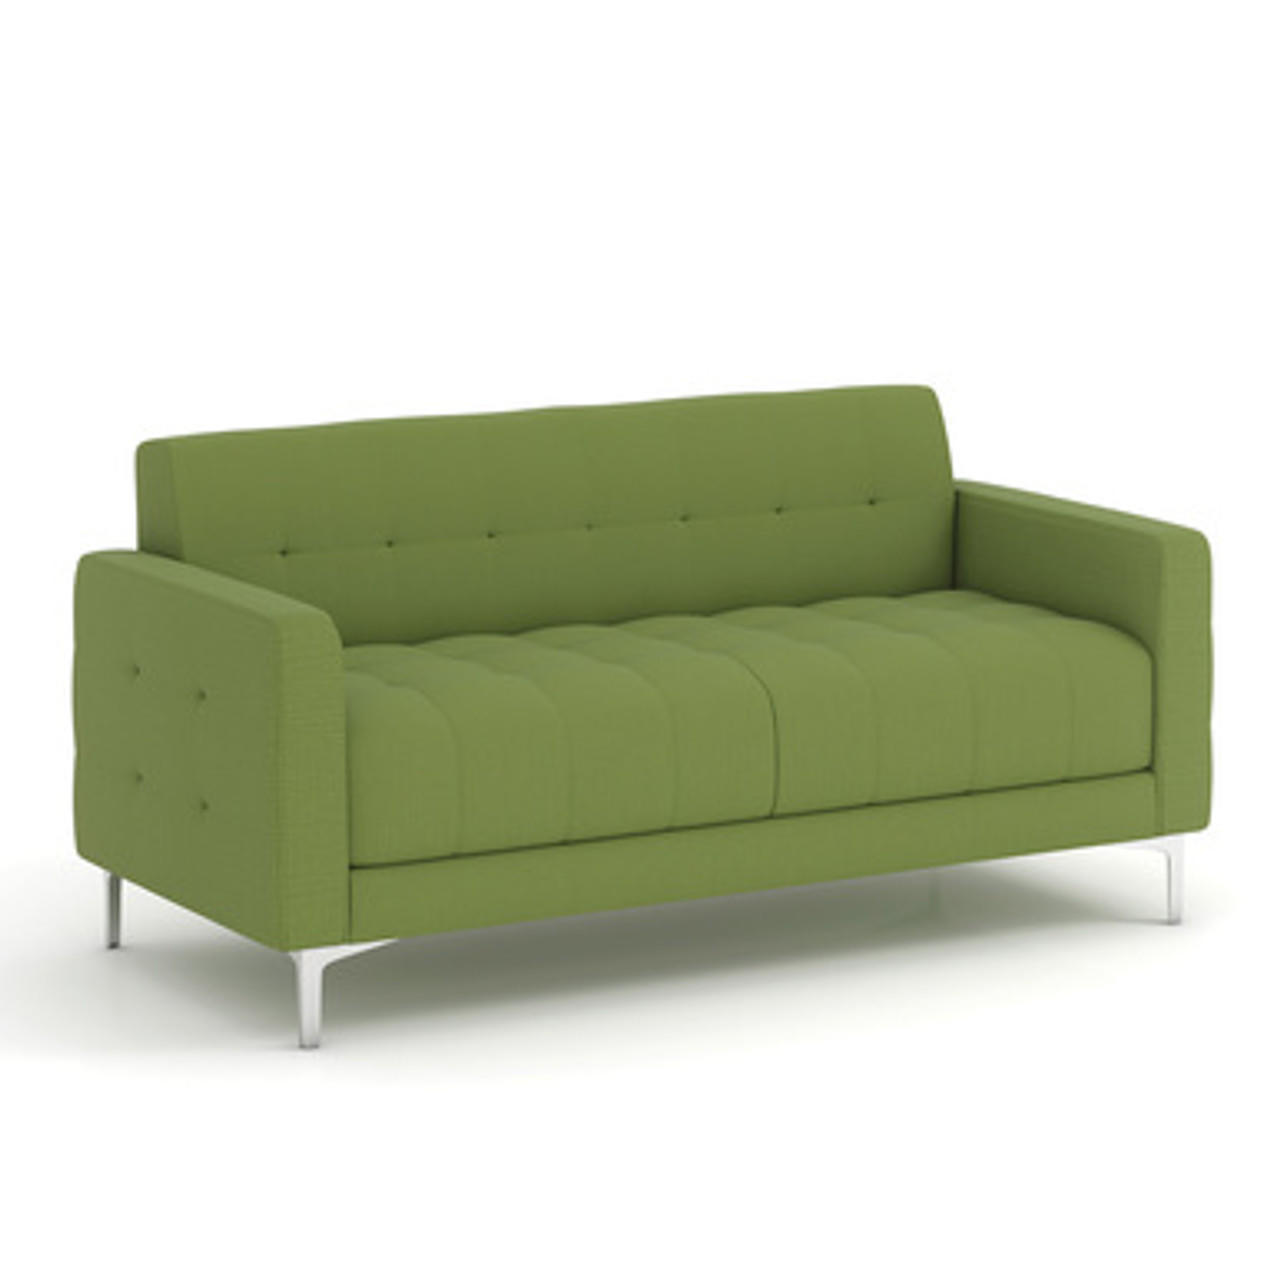  Office Source Draper Collection 3 Piece Retro Reception Seating Layout 